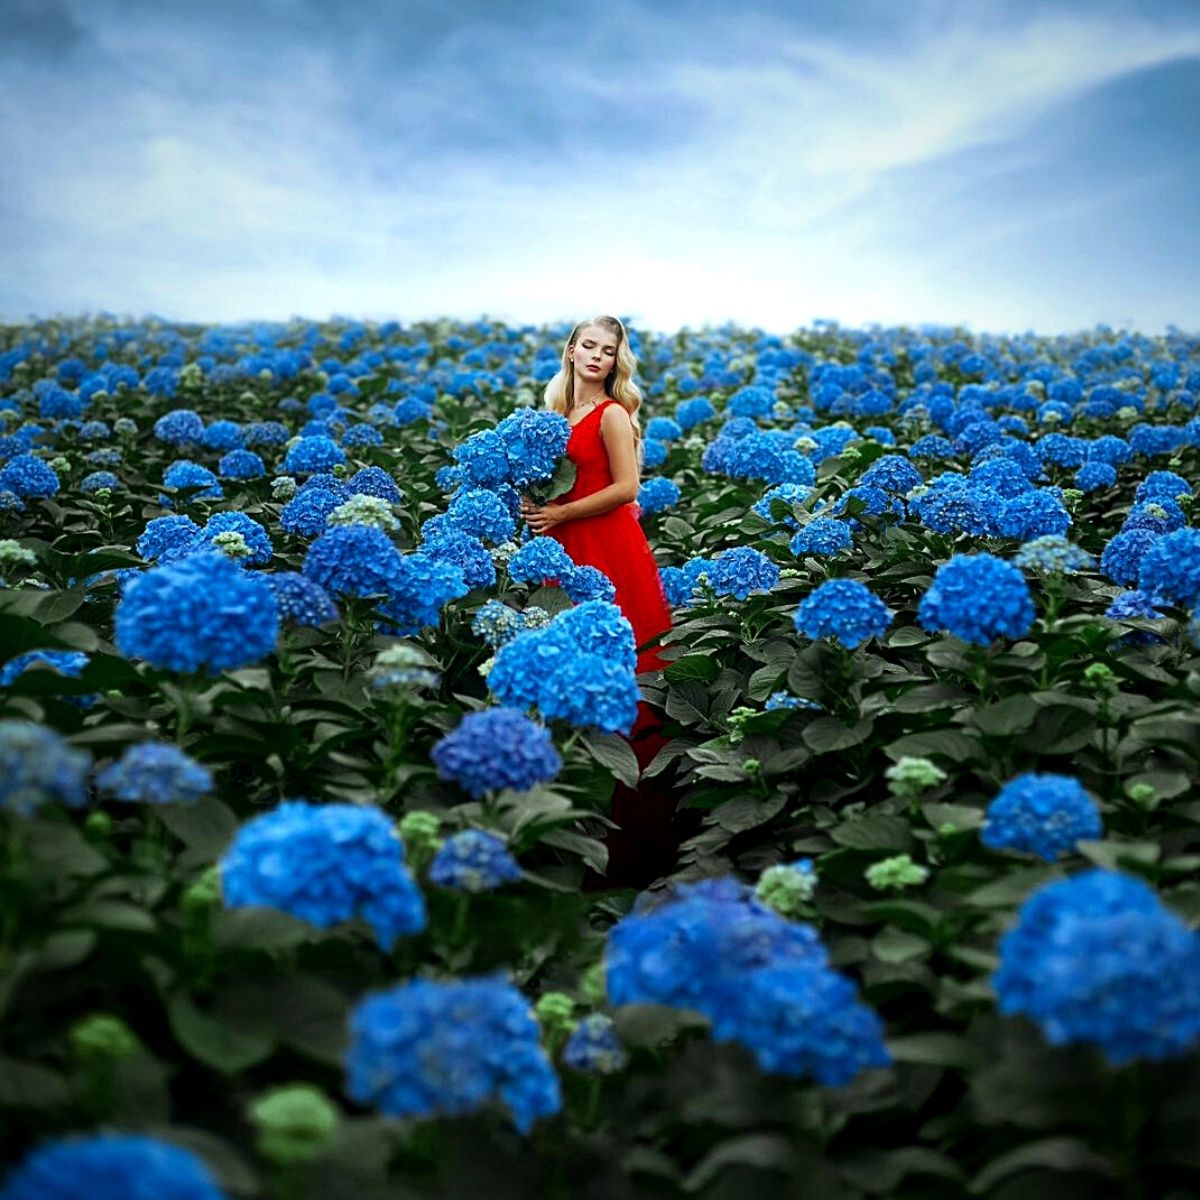 Art Photo Projects - Photoshoots That Give an Everlasting Life to Flowers